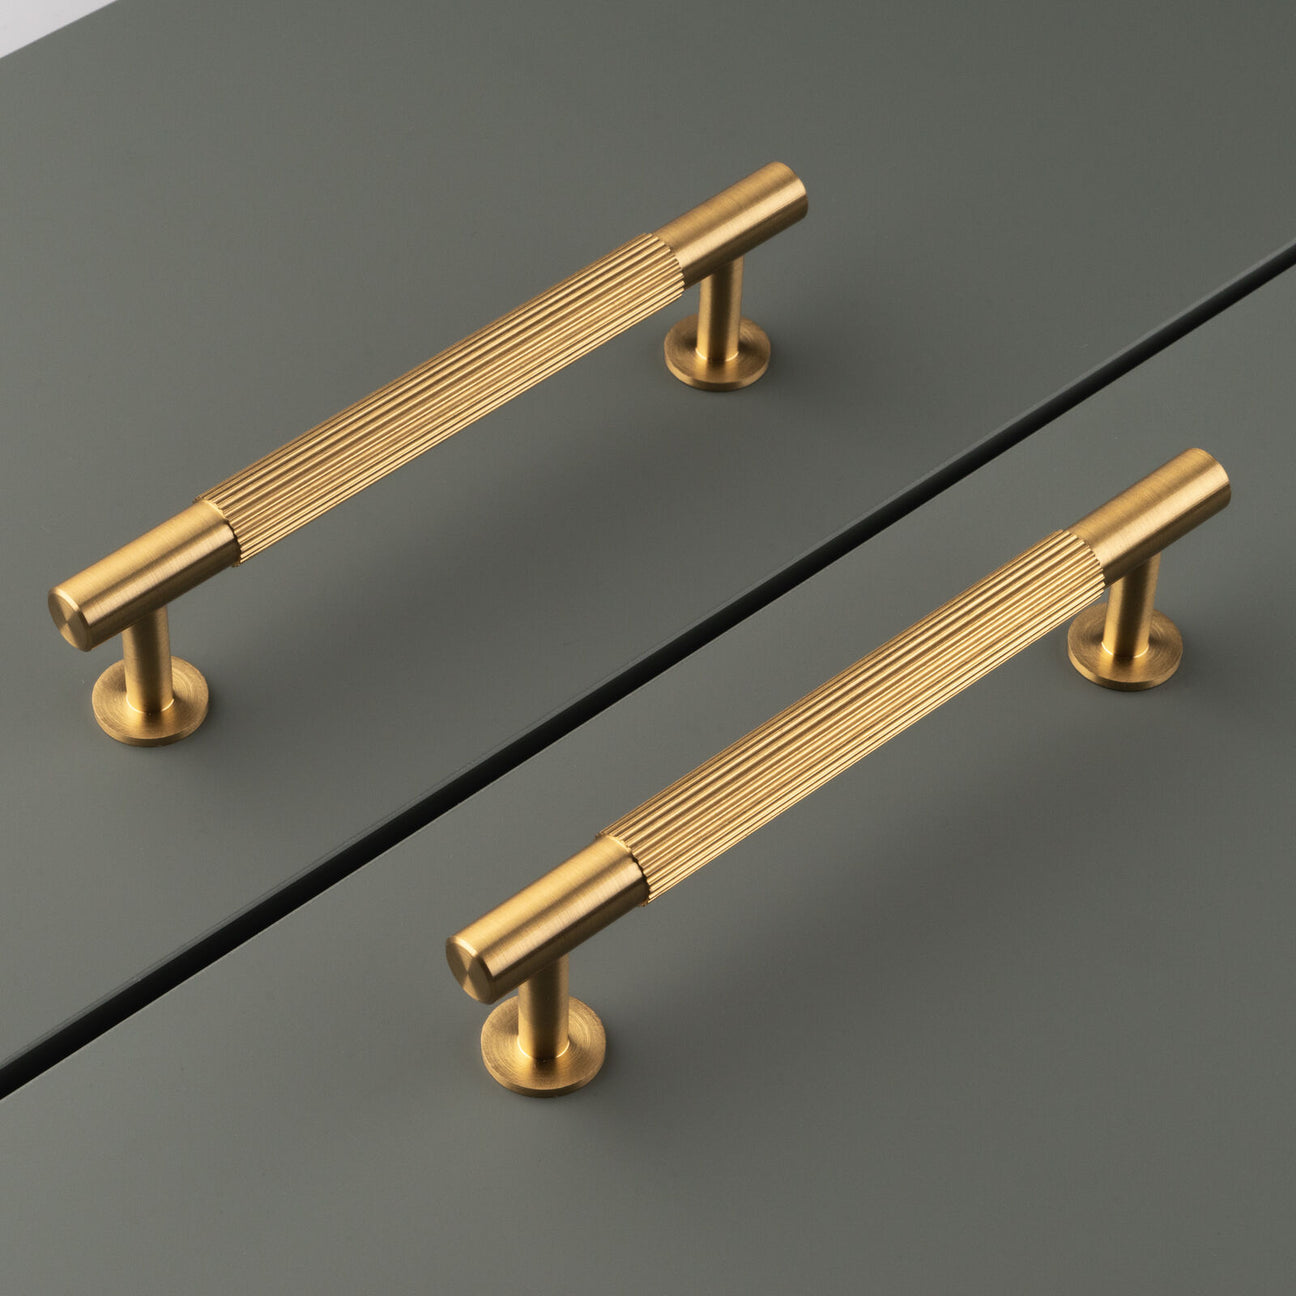 Image showing a pair of Cabinet Pull Handles in Satin Brass made by Carlisle Brass